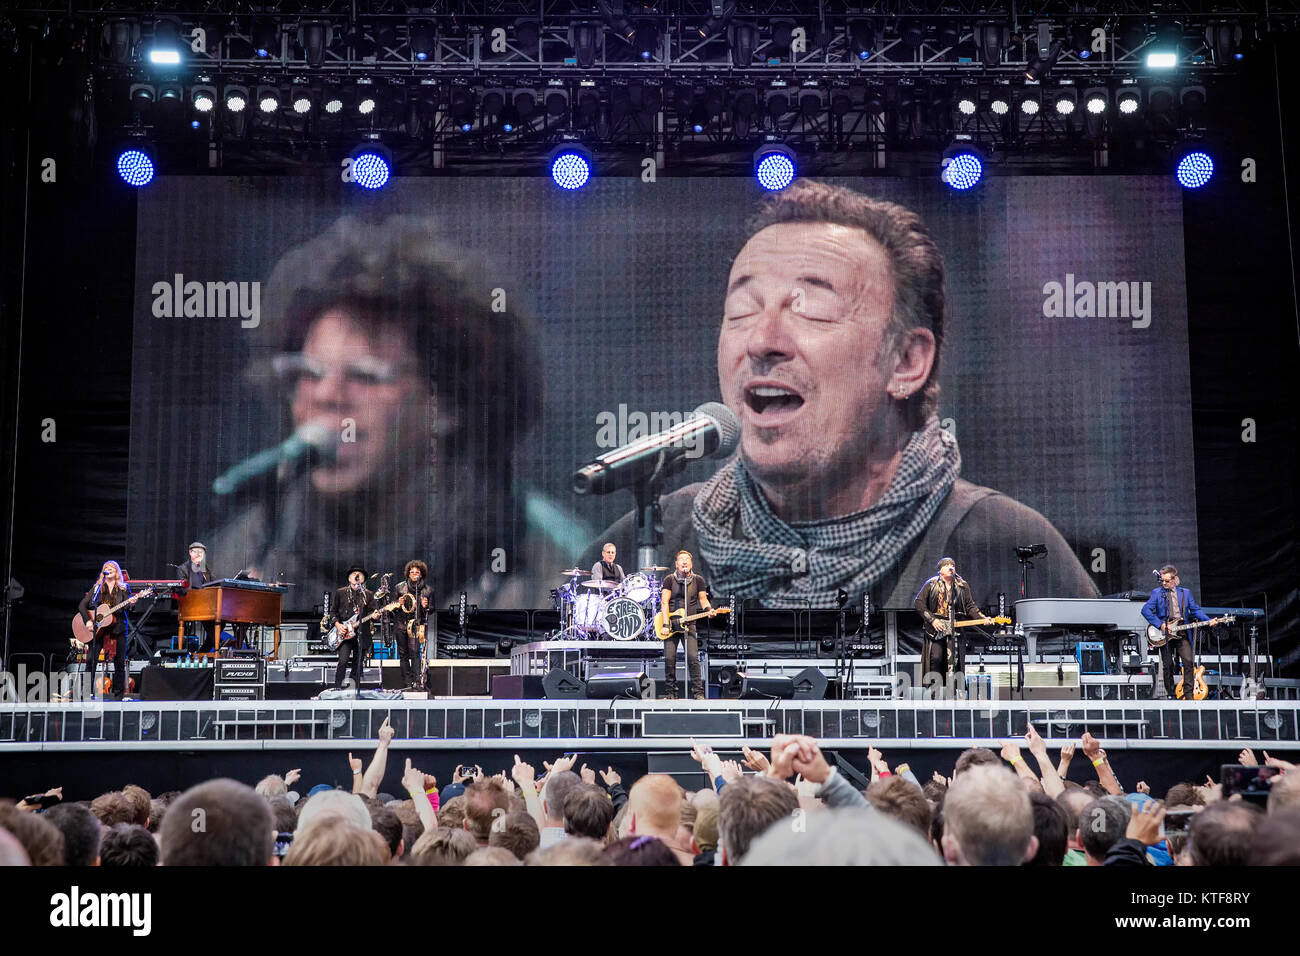 The American singer, songwriter and musician Bruce Springsteen performs a live concert with his band The E Street Band at Ullevaal Stadion in Oslo. Bruce Springsteen is also known as The Boss and the concert was part of The River Tour. Norway, 29/06 2016. Stock Photo